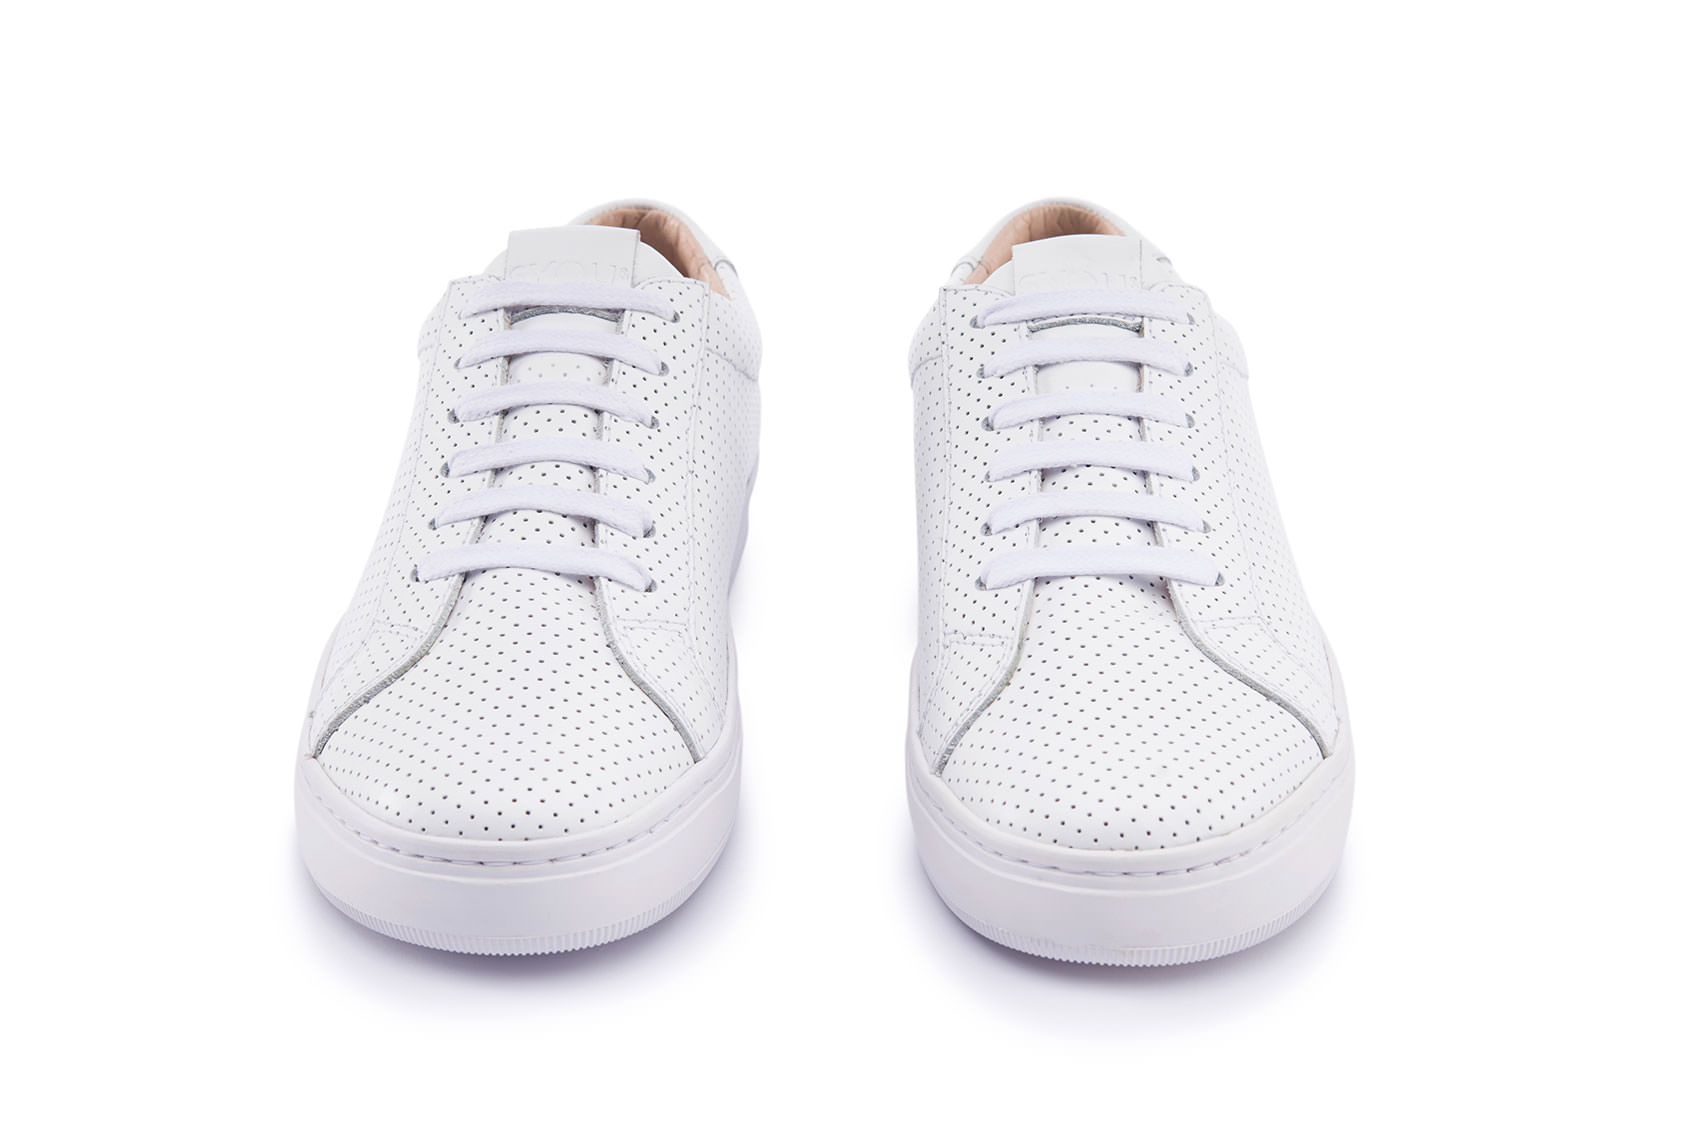 Syou co l03 all white leather dot front